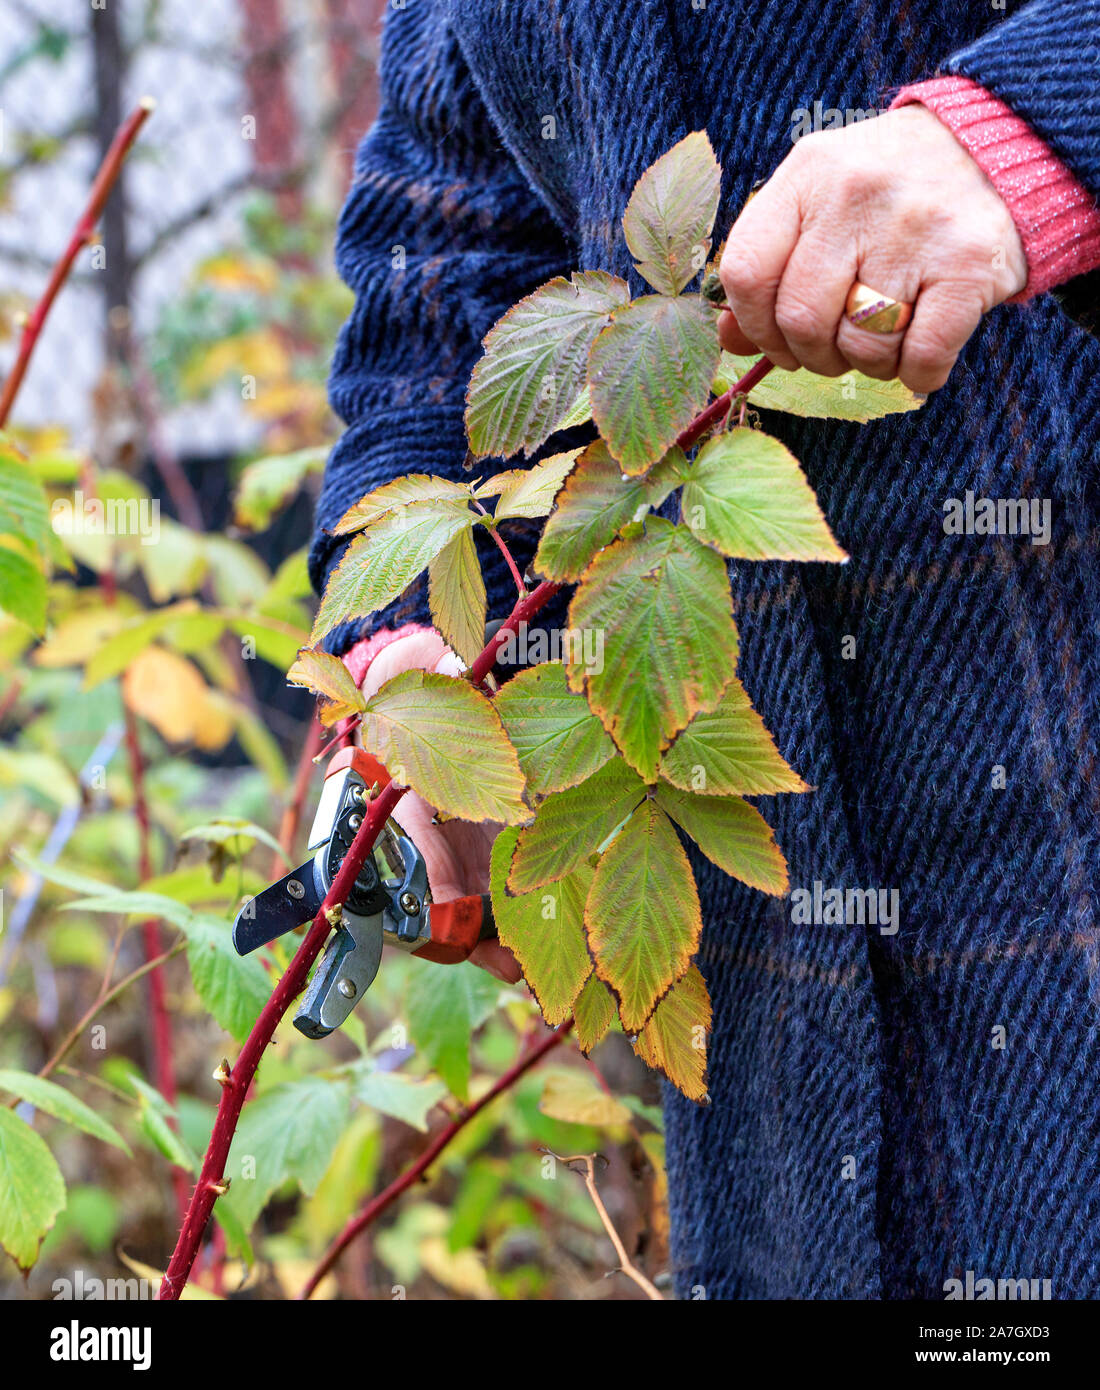 Gardener using a garden pruner cuts and rejuvenates a raspberry bush in an autumn garden for a good harvest next year, image vertical with copy space. Stock Photo